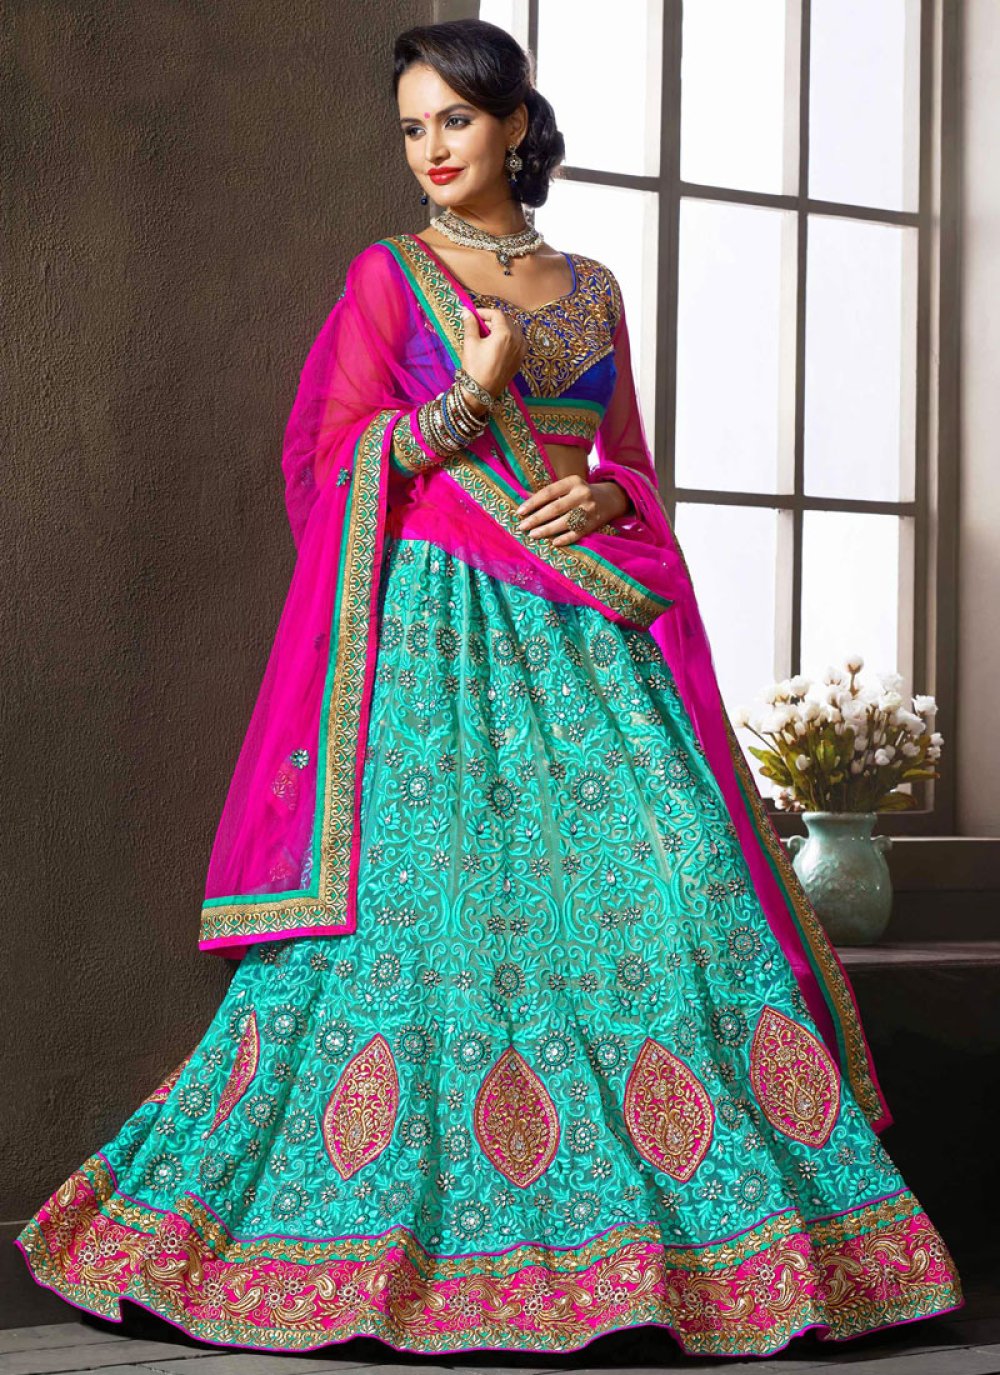 Lehenga Choli | Pink Lehenga | Lehenga Choli | Lehenga | Wedding Outfit |  Ethnic Wear | Indian Outfit | Shaadi | Blouse | Freeup